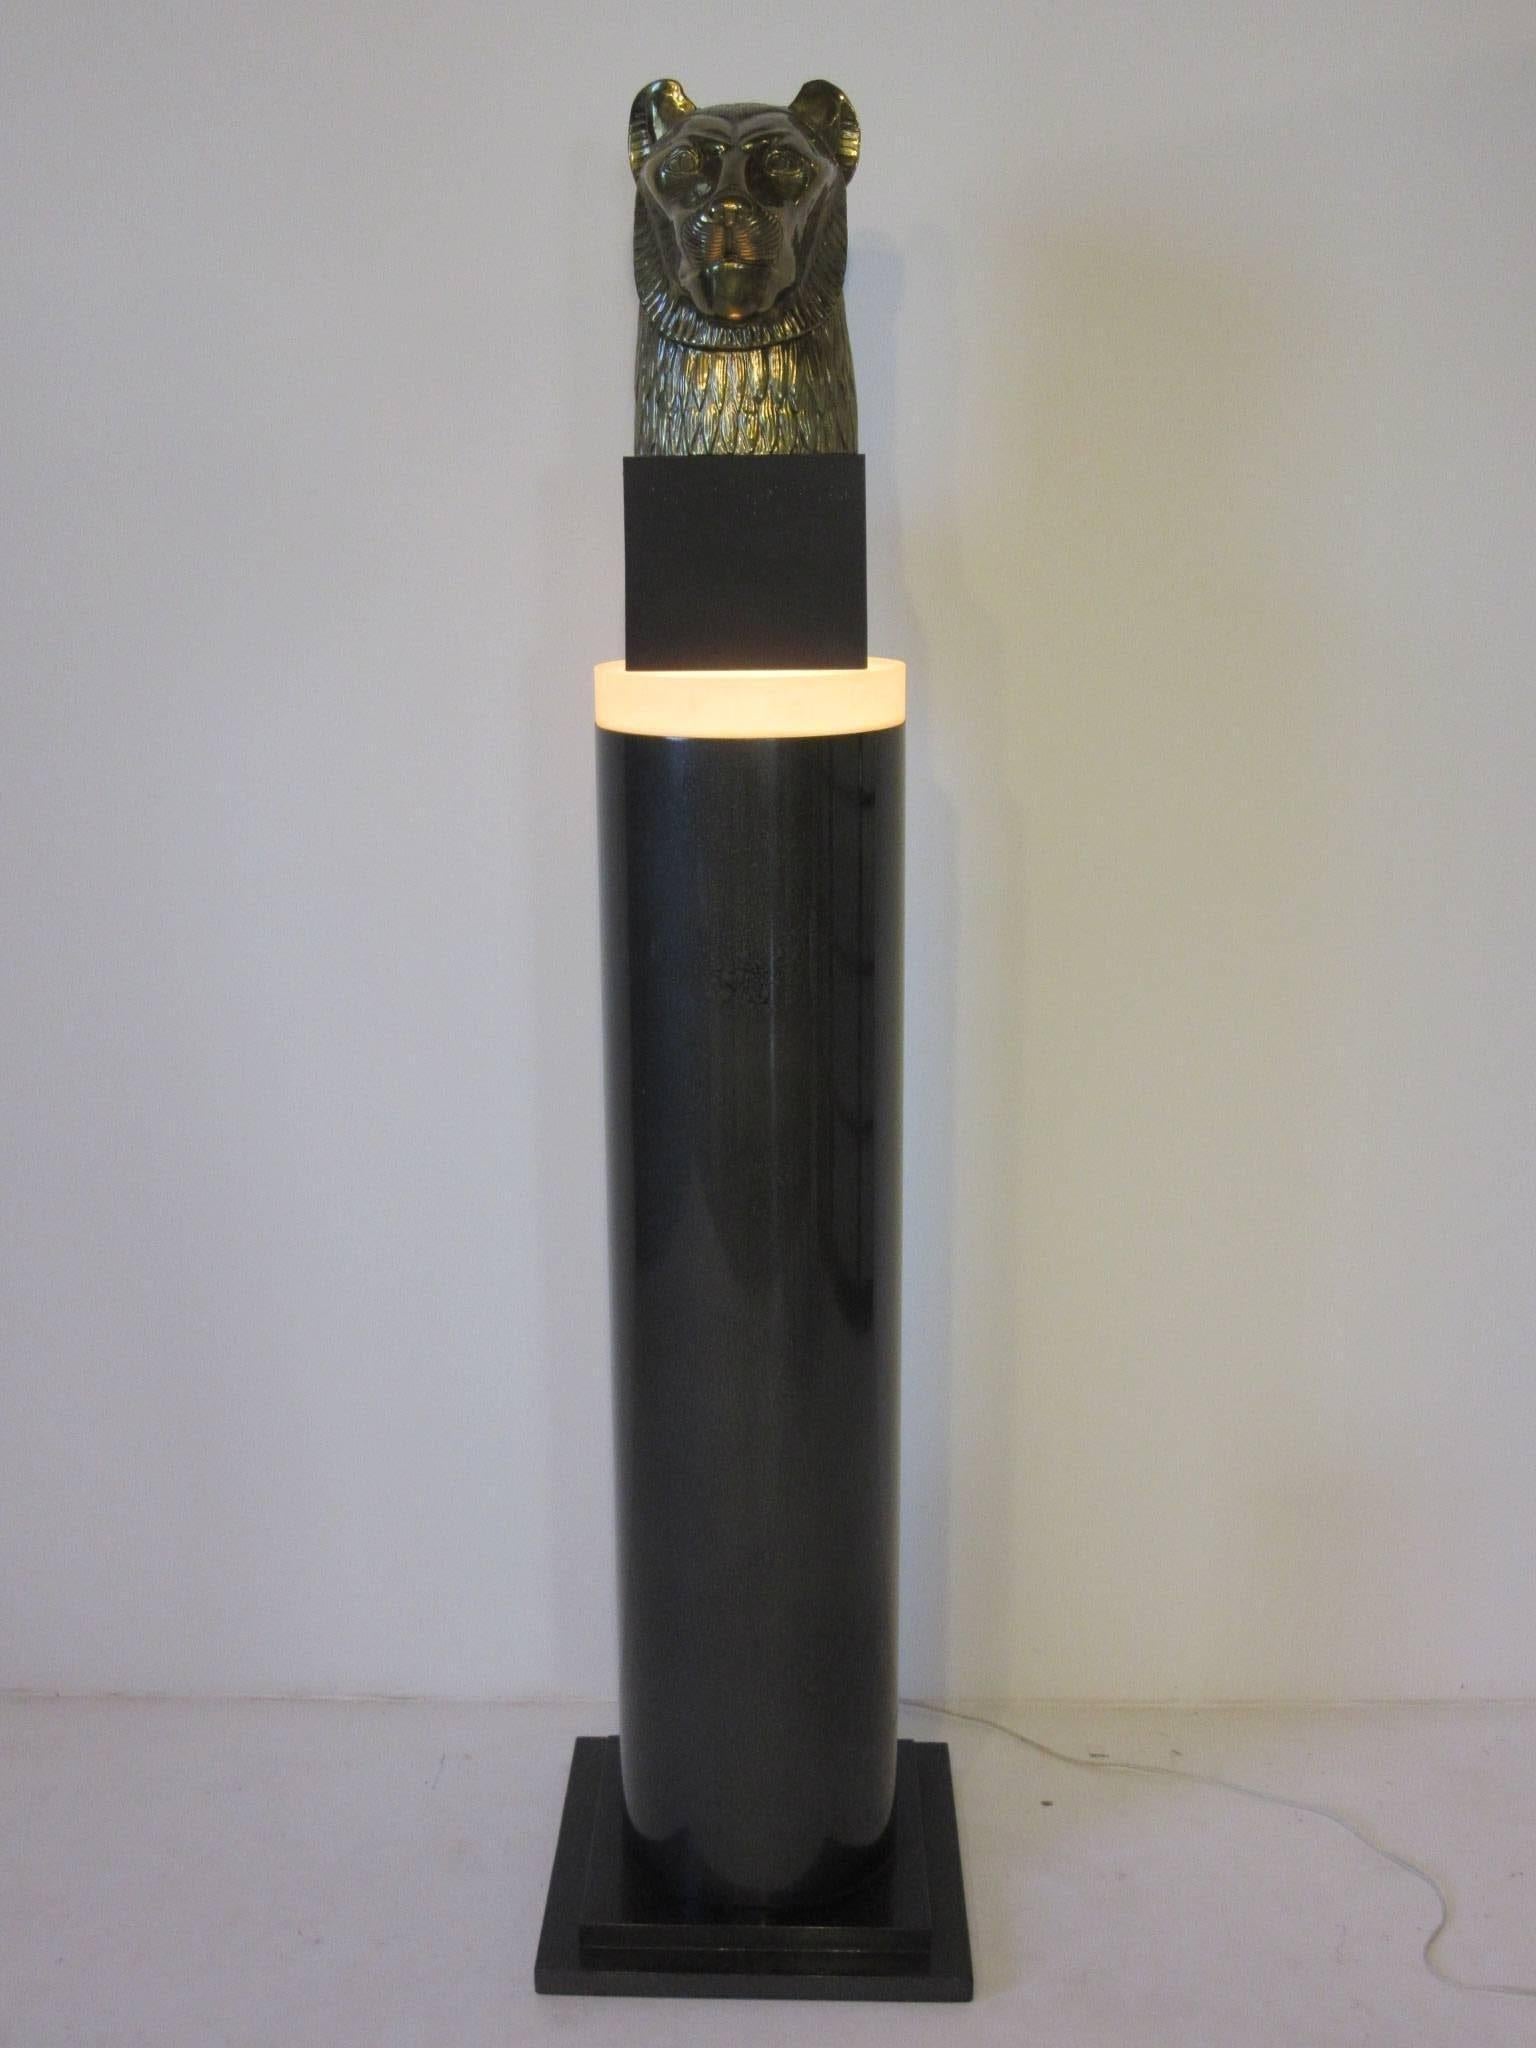 Monumental Memphis Styled Lucite Light Up Column Pedestal In Good Condition For Sale In Cincinnati, OH